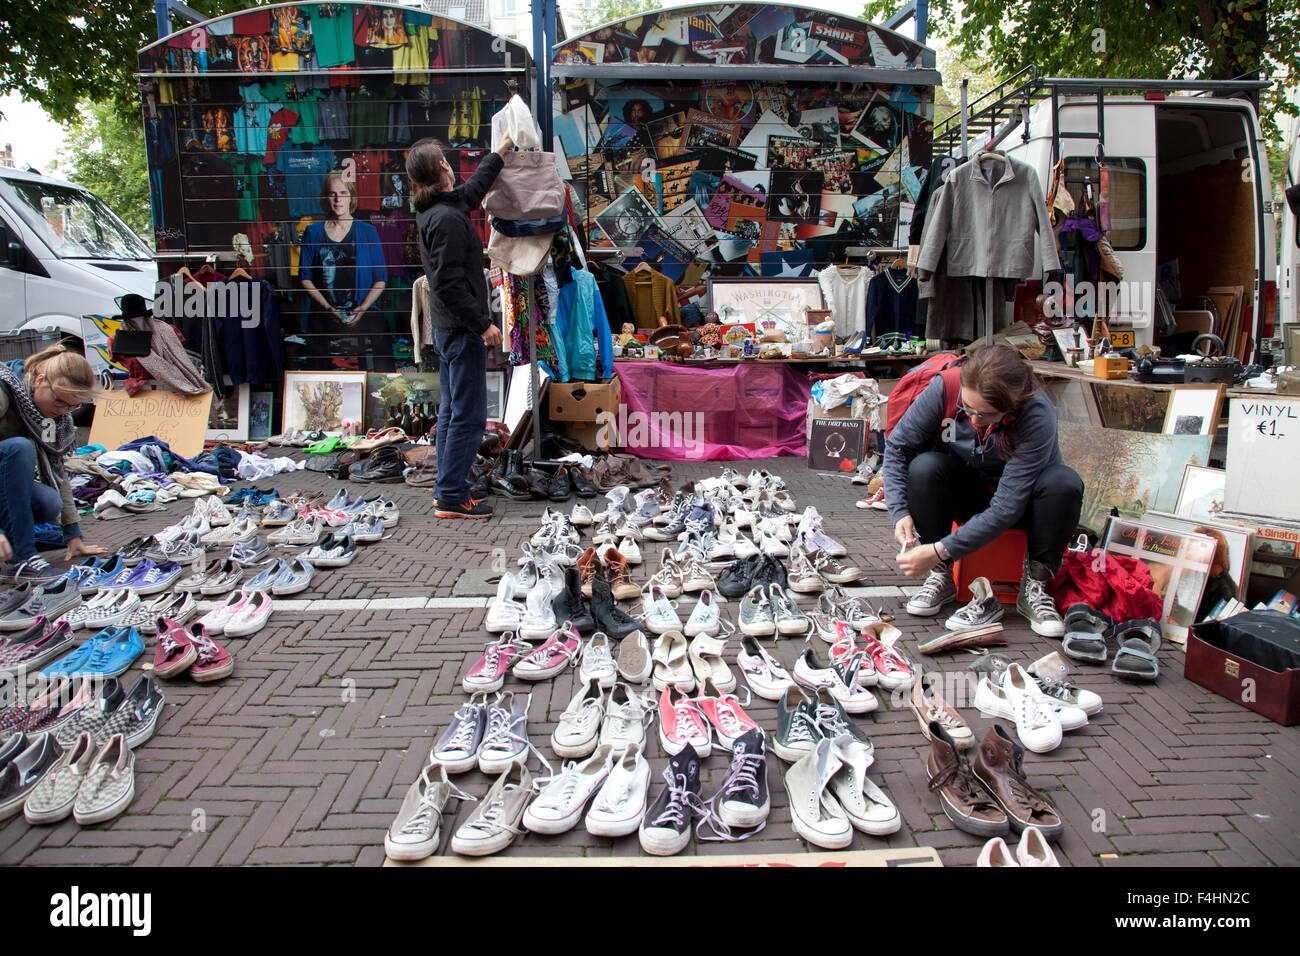 Shoes and clothes compete with tee shirts and vinyl records in this stall at the Waterlooplein Flea Market in Amsterdam. Stock Photo